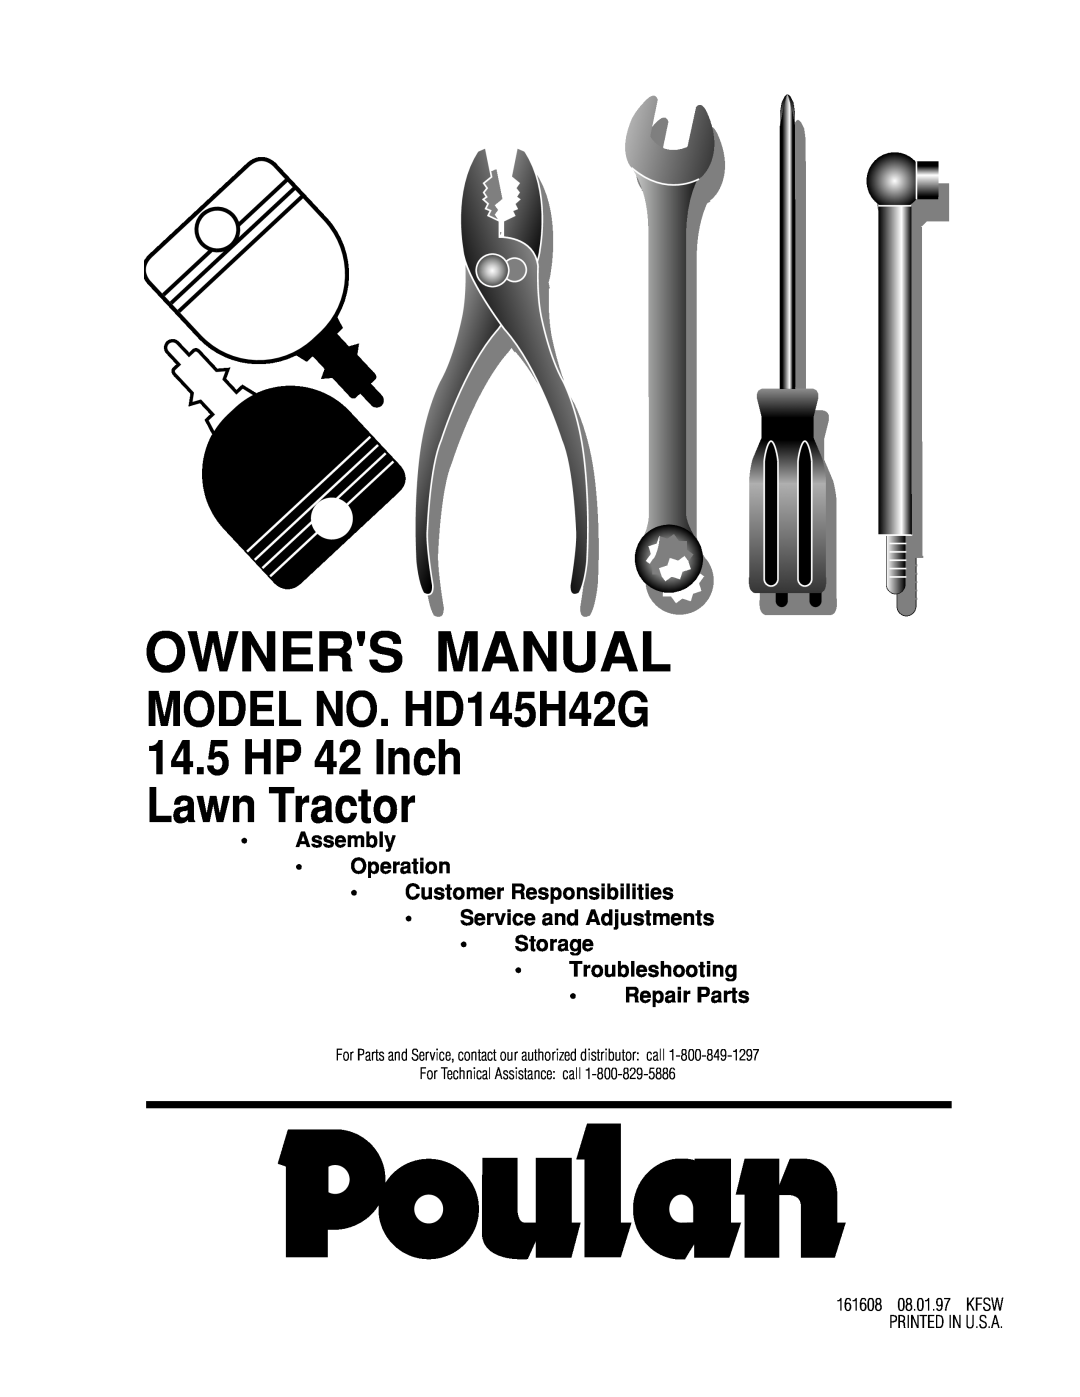 Poulan 161608 owner manual MODEL NO. HD145H42G 14.5 HP 42 Inch Lawn Tractor, Storage Troubleshooting Repair Parts 